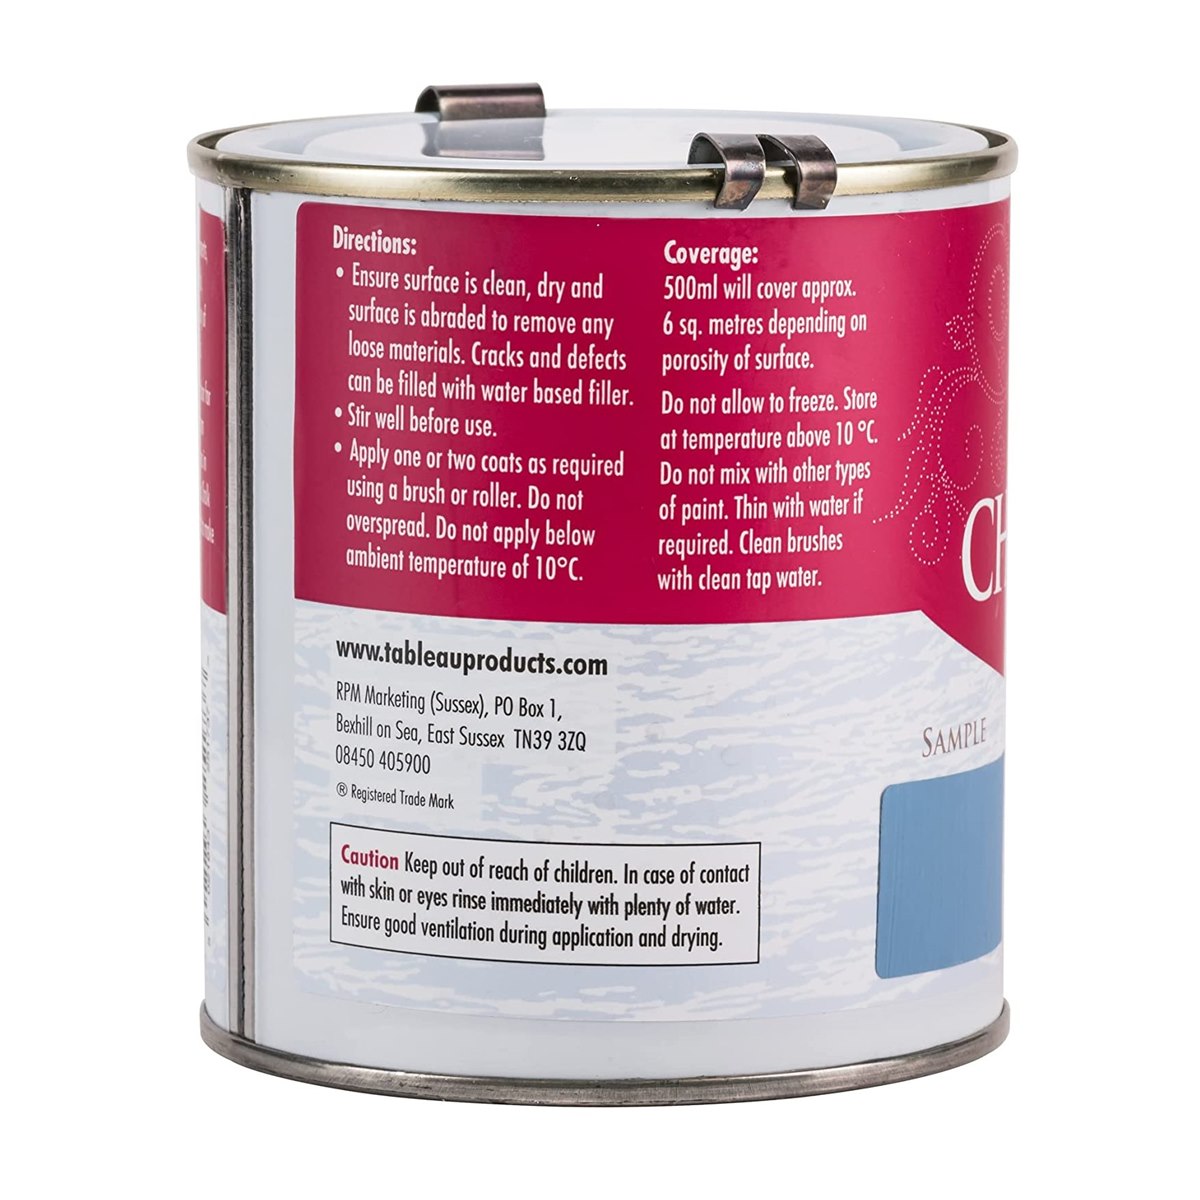 Where to Buy Tableau Chalk Paint Blue